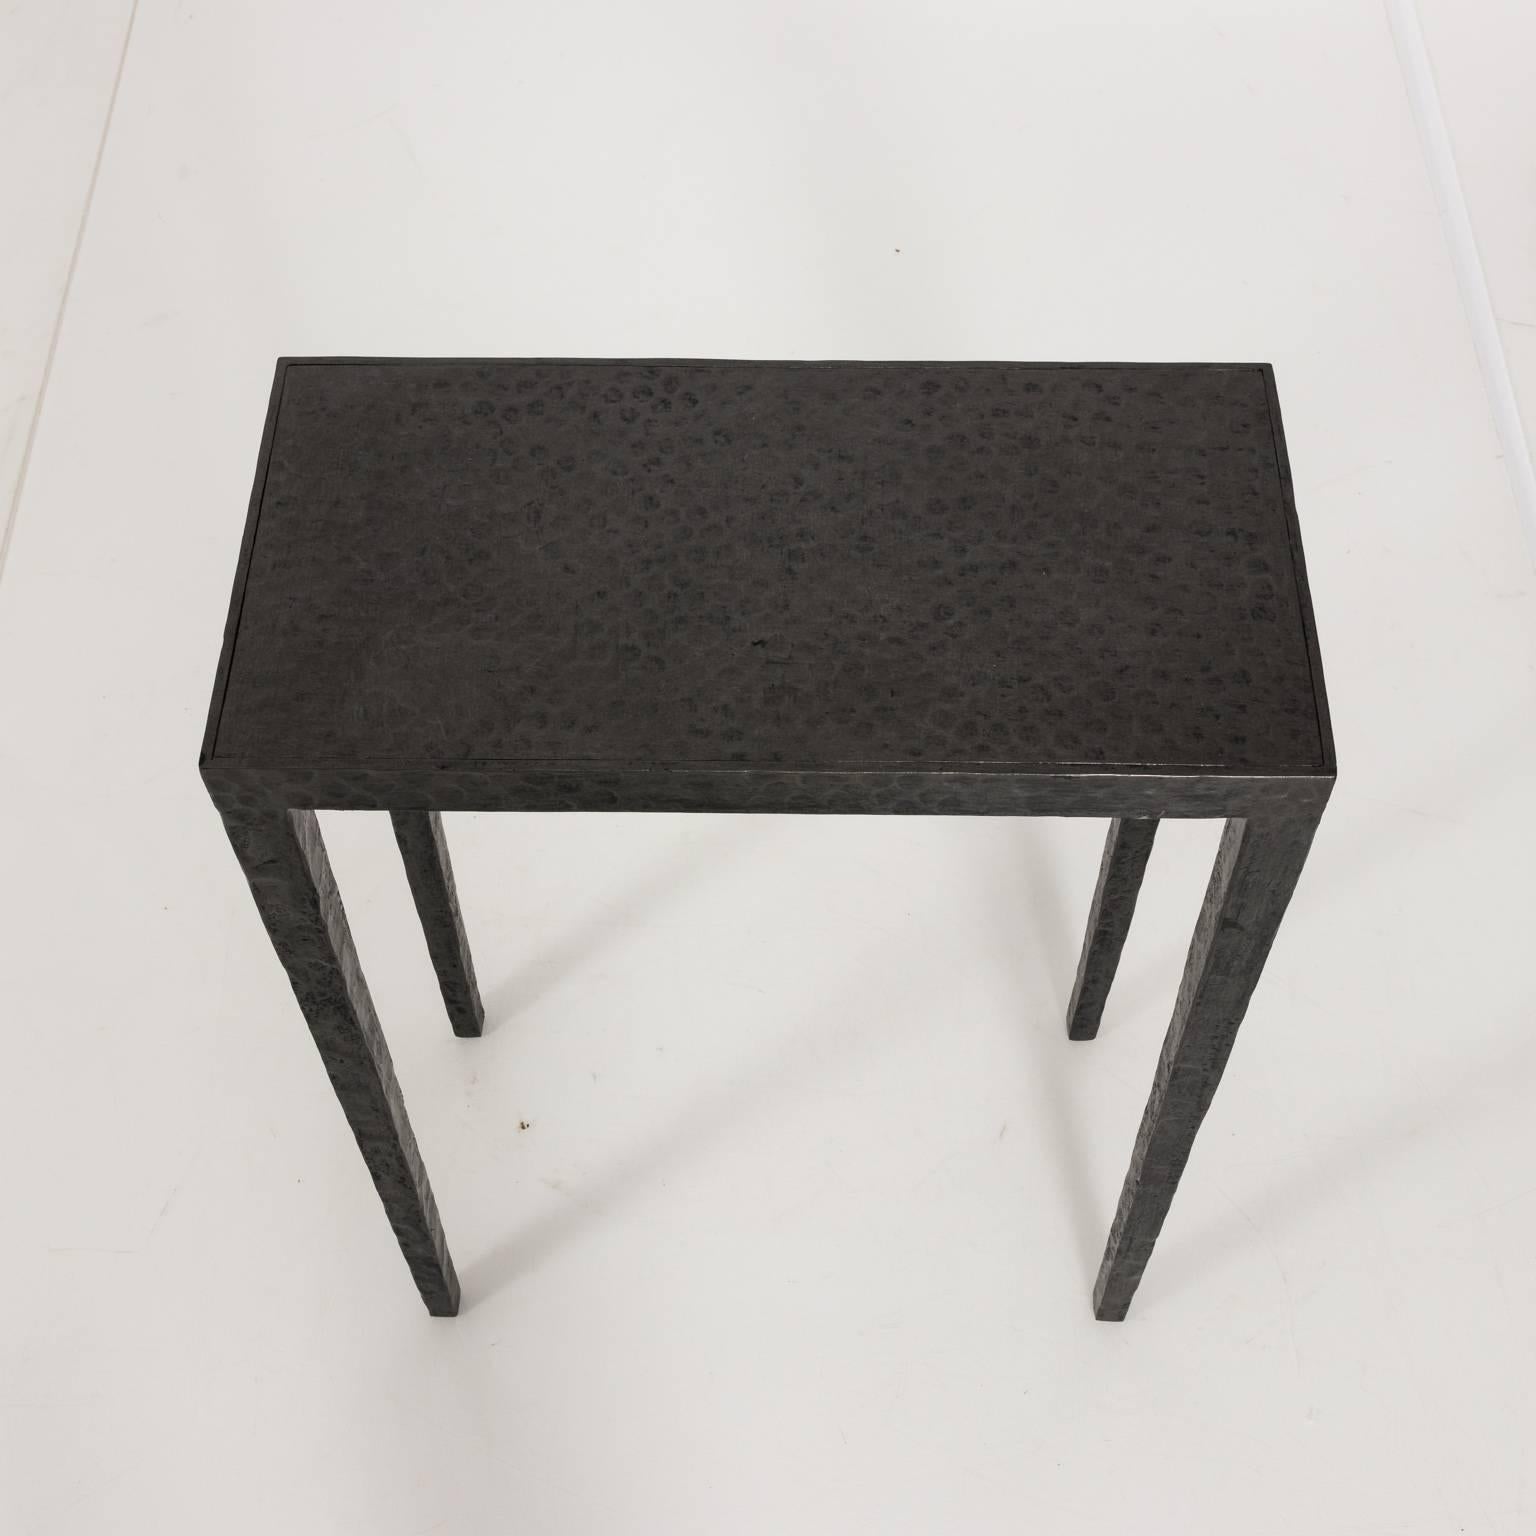 Iron side table by Pierce Martin in a hammered finish, circa 2000.